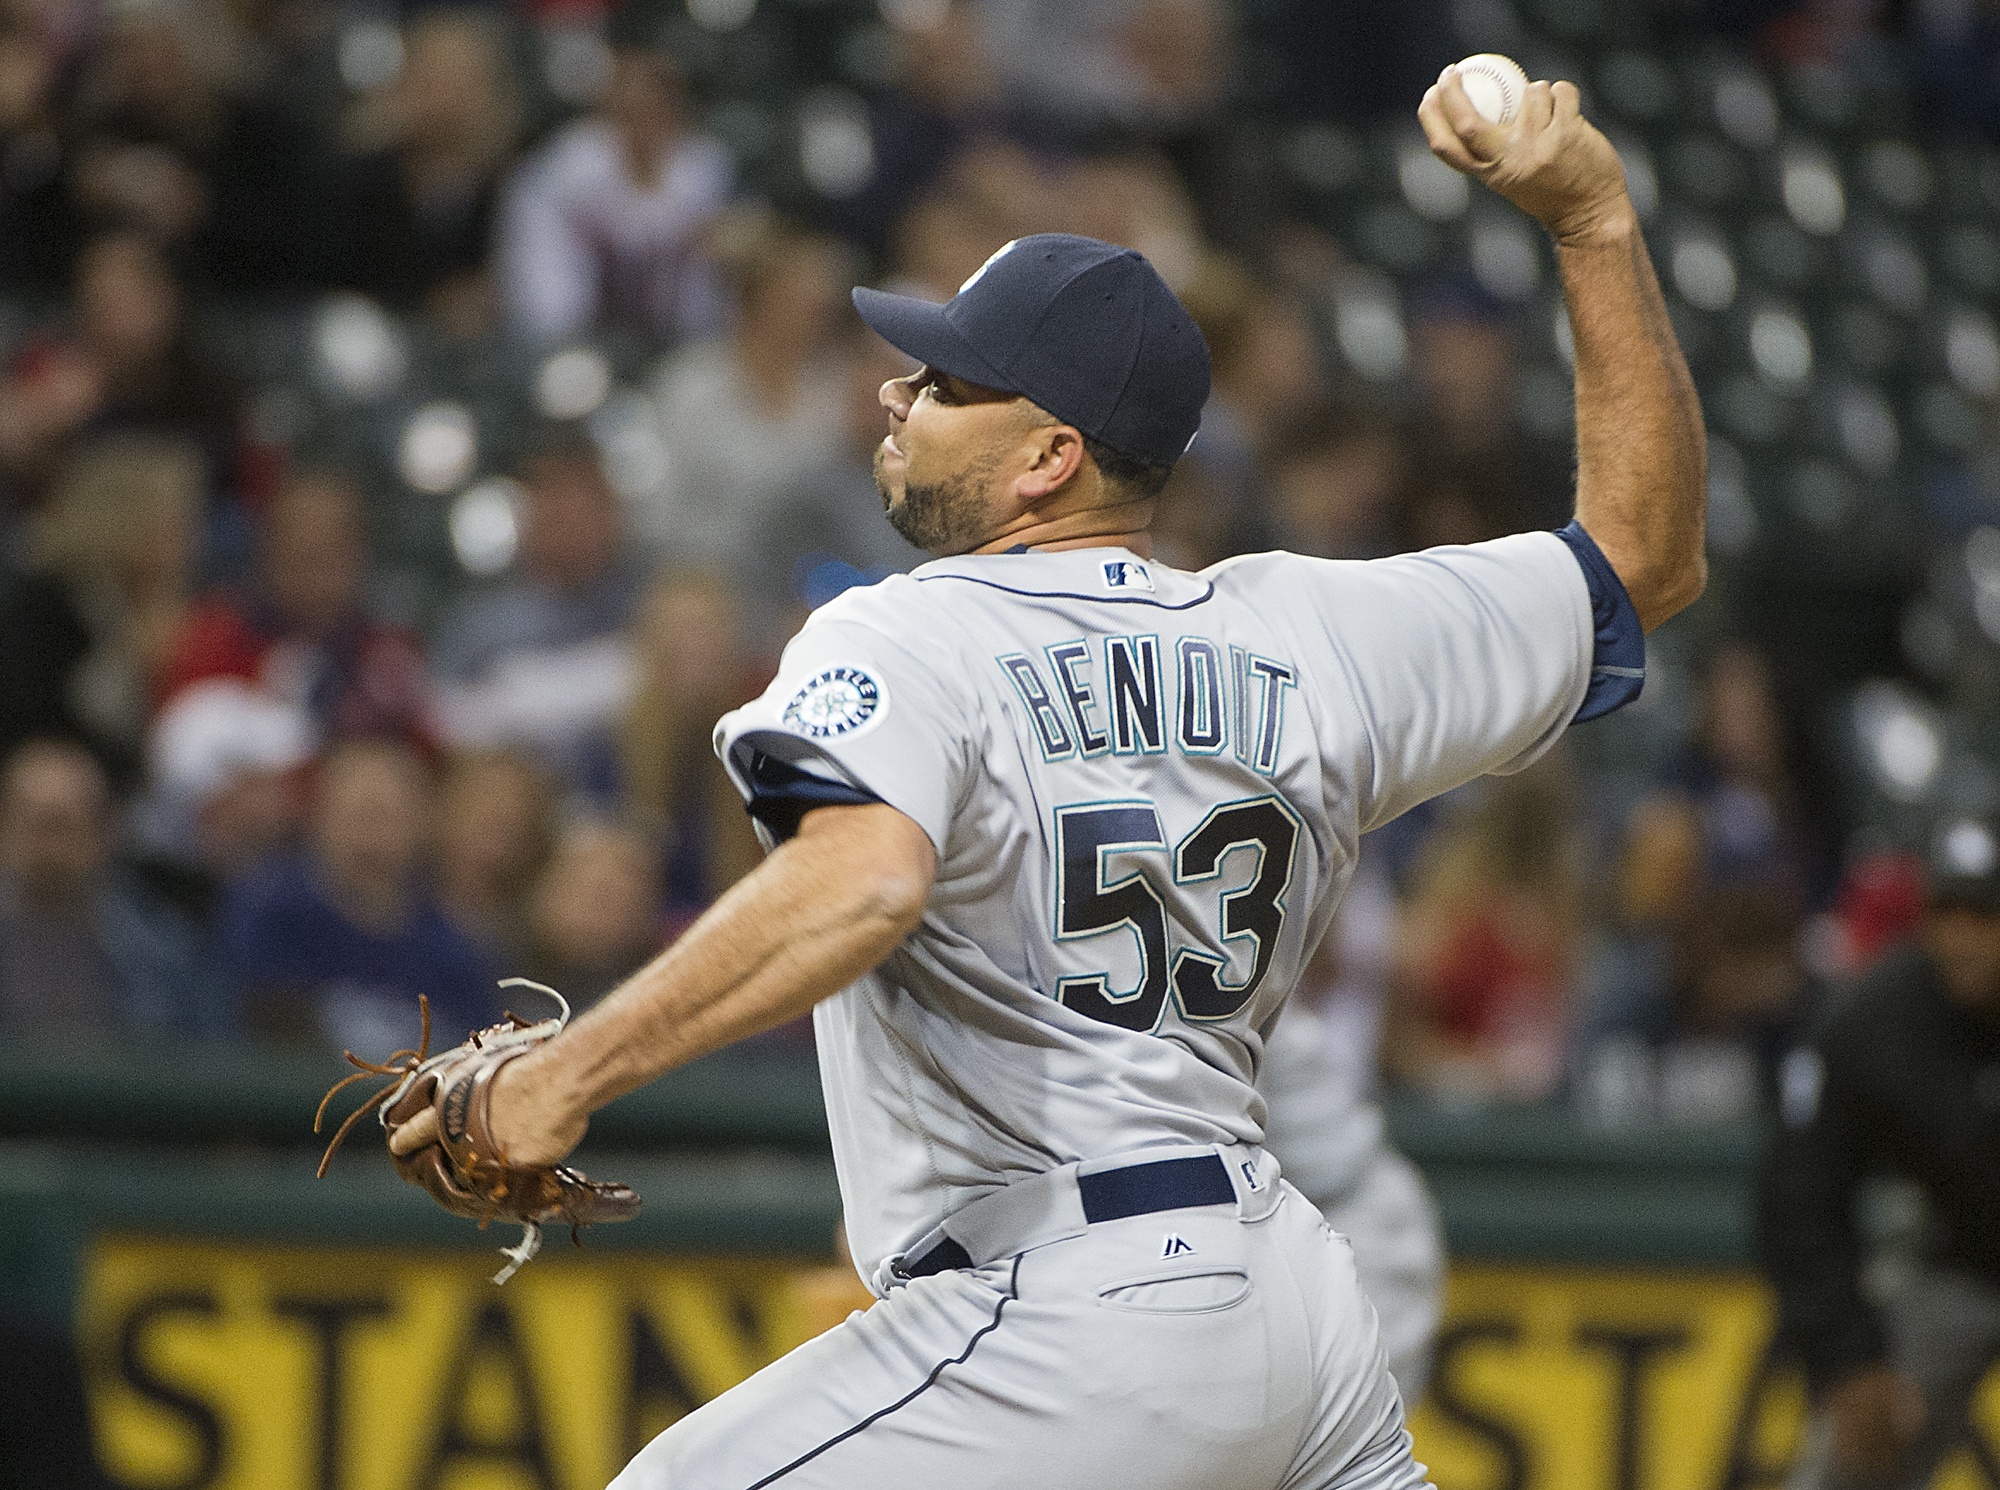 Mariners reliever Joaquin Benoit, who has been on the disabled list, hasn’t pitched since April 21.